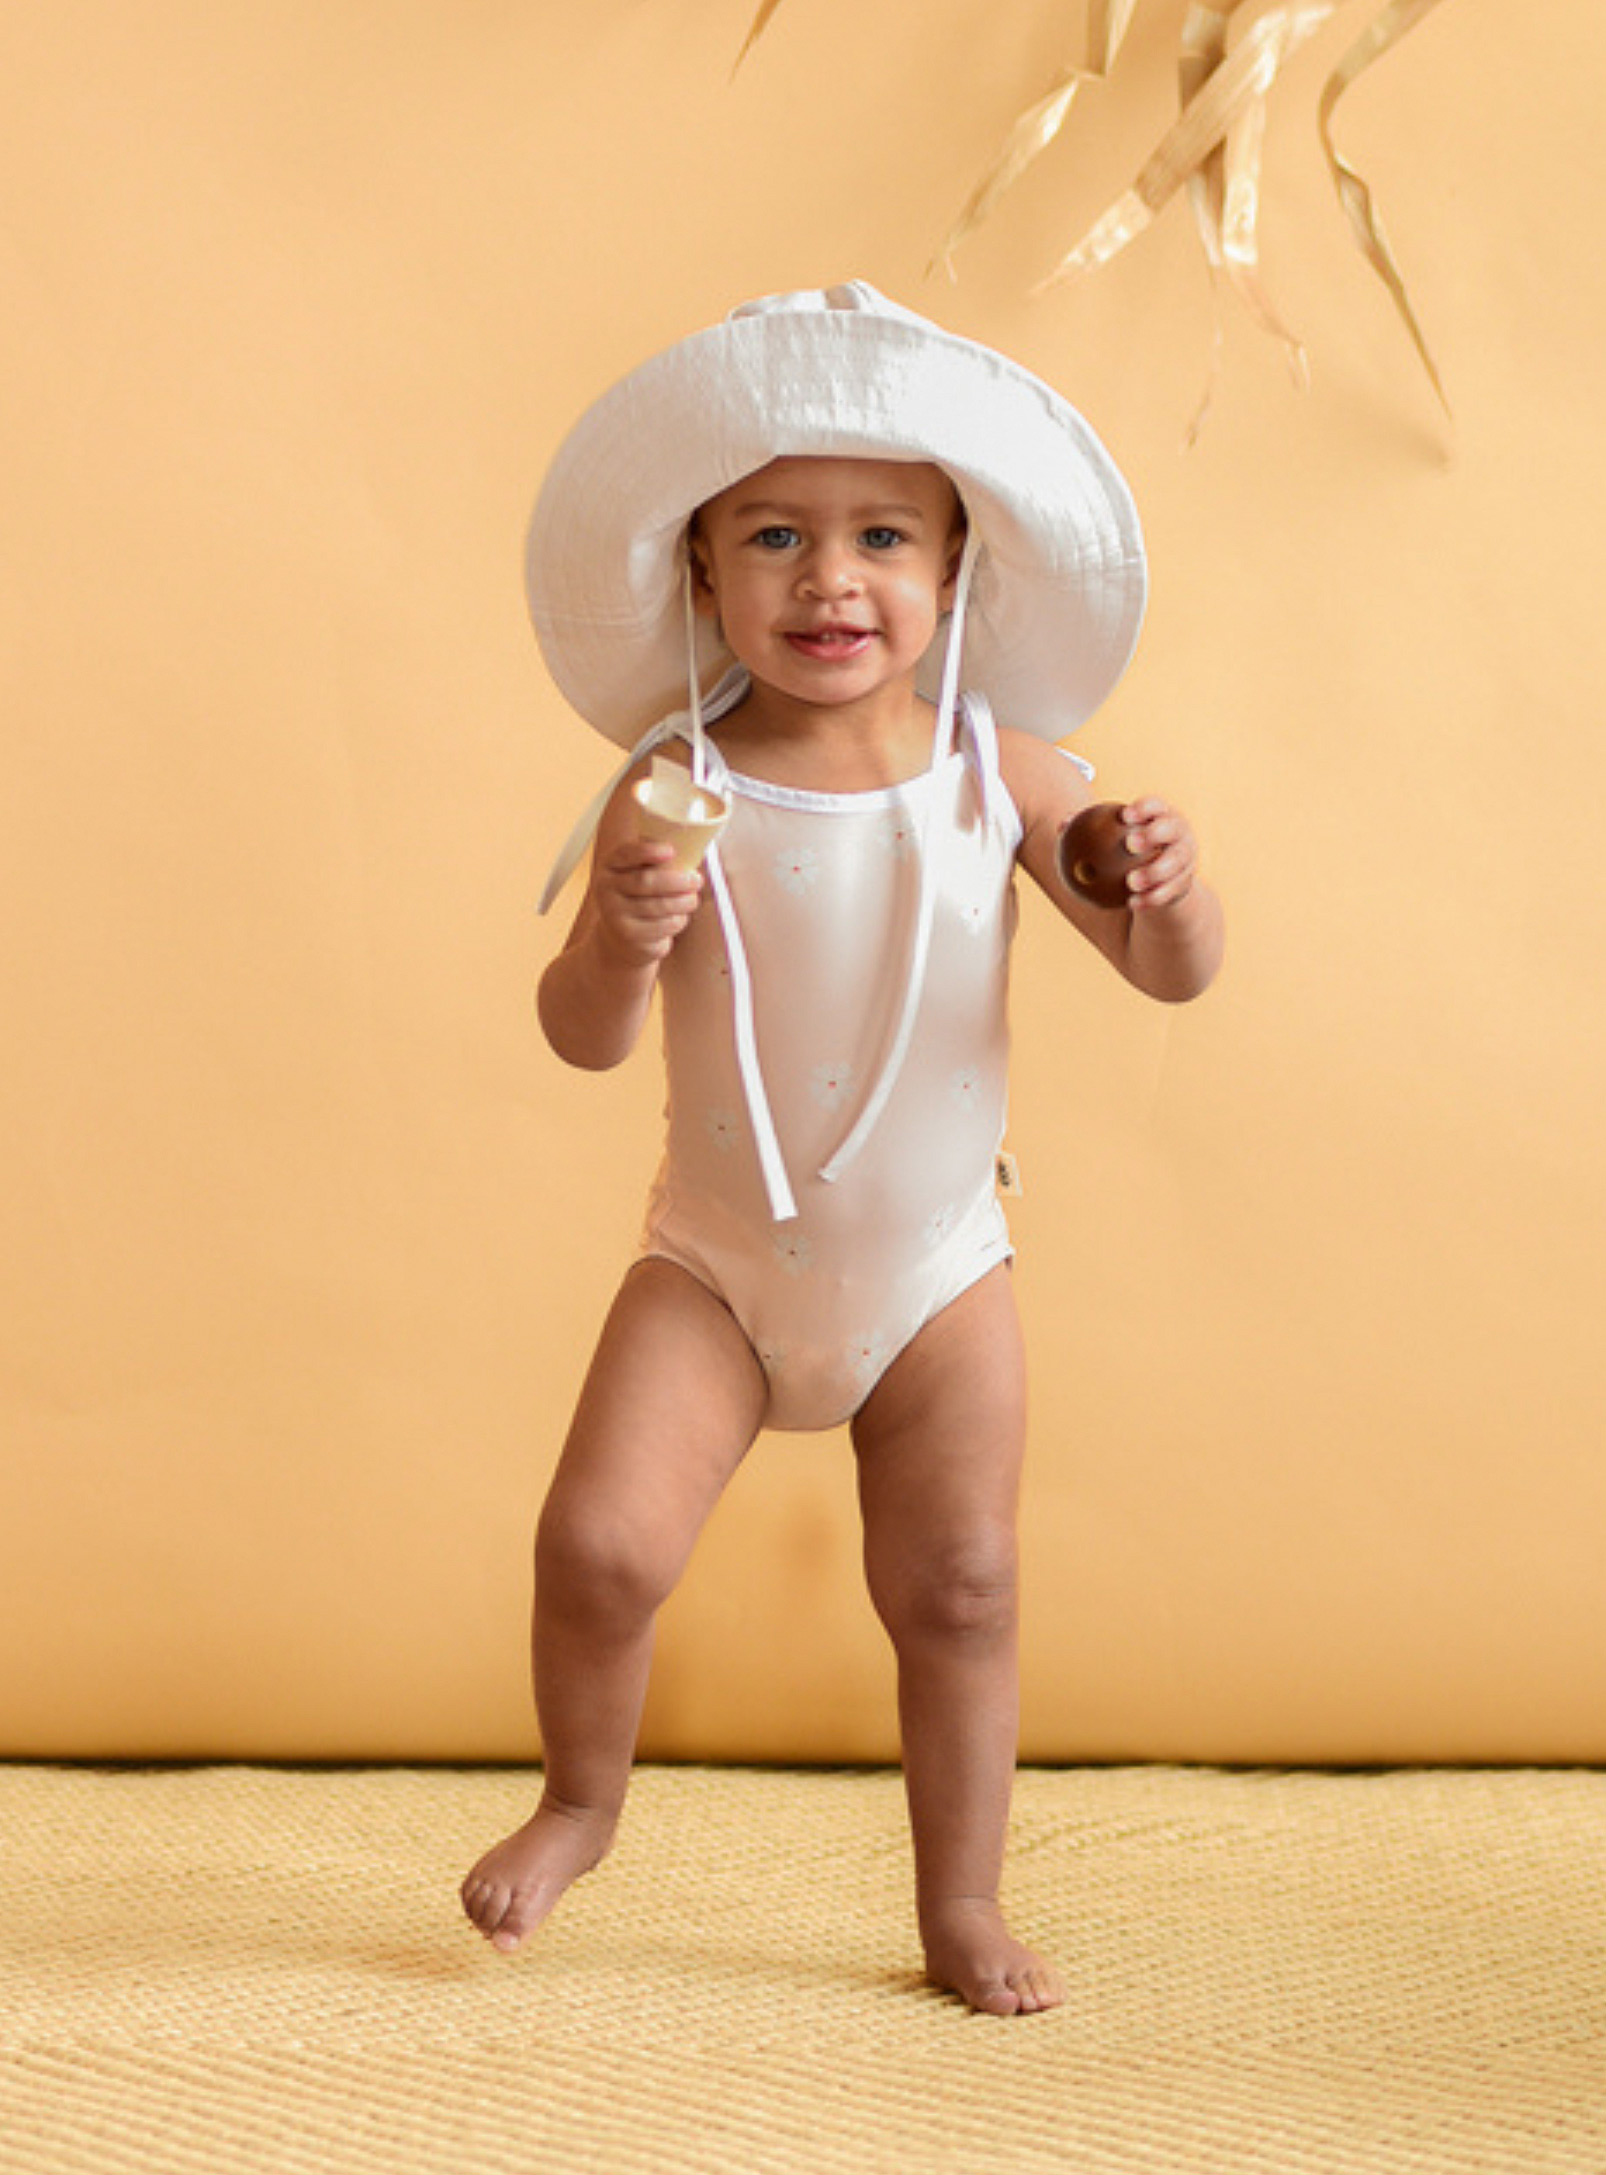 Les petites natures - Tie-strap one-piece swimsuit 6-12 months to 5-6 years